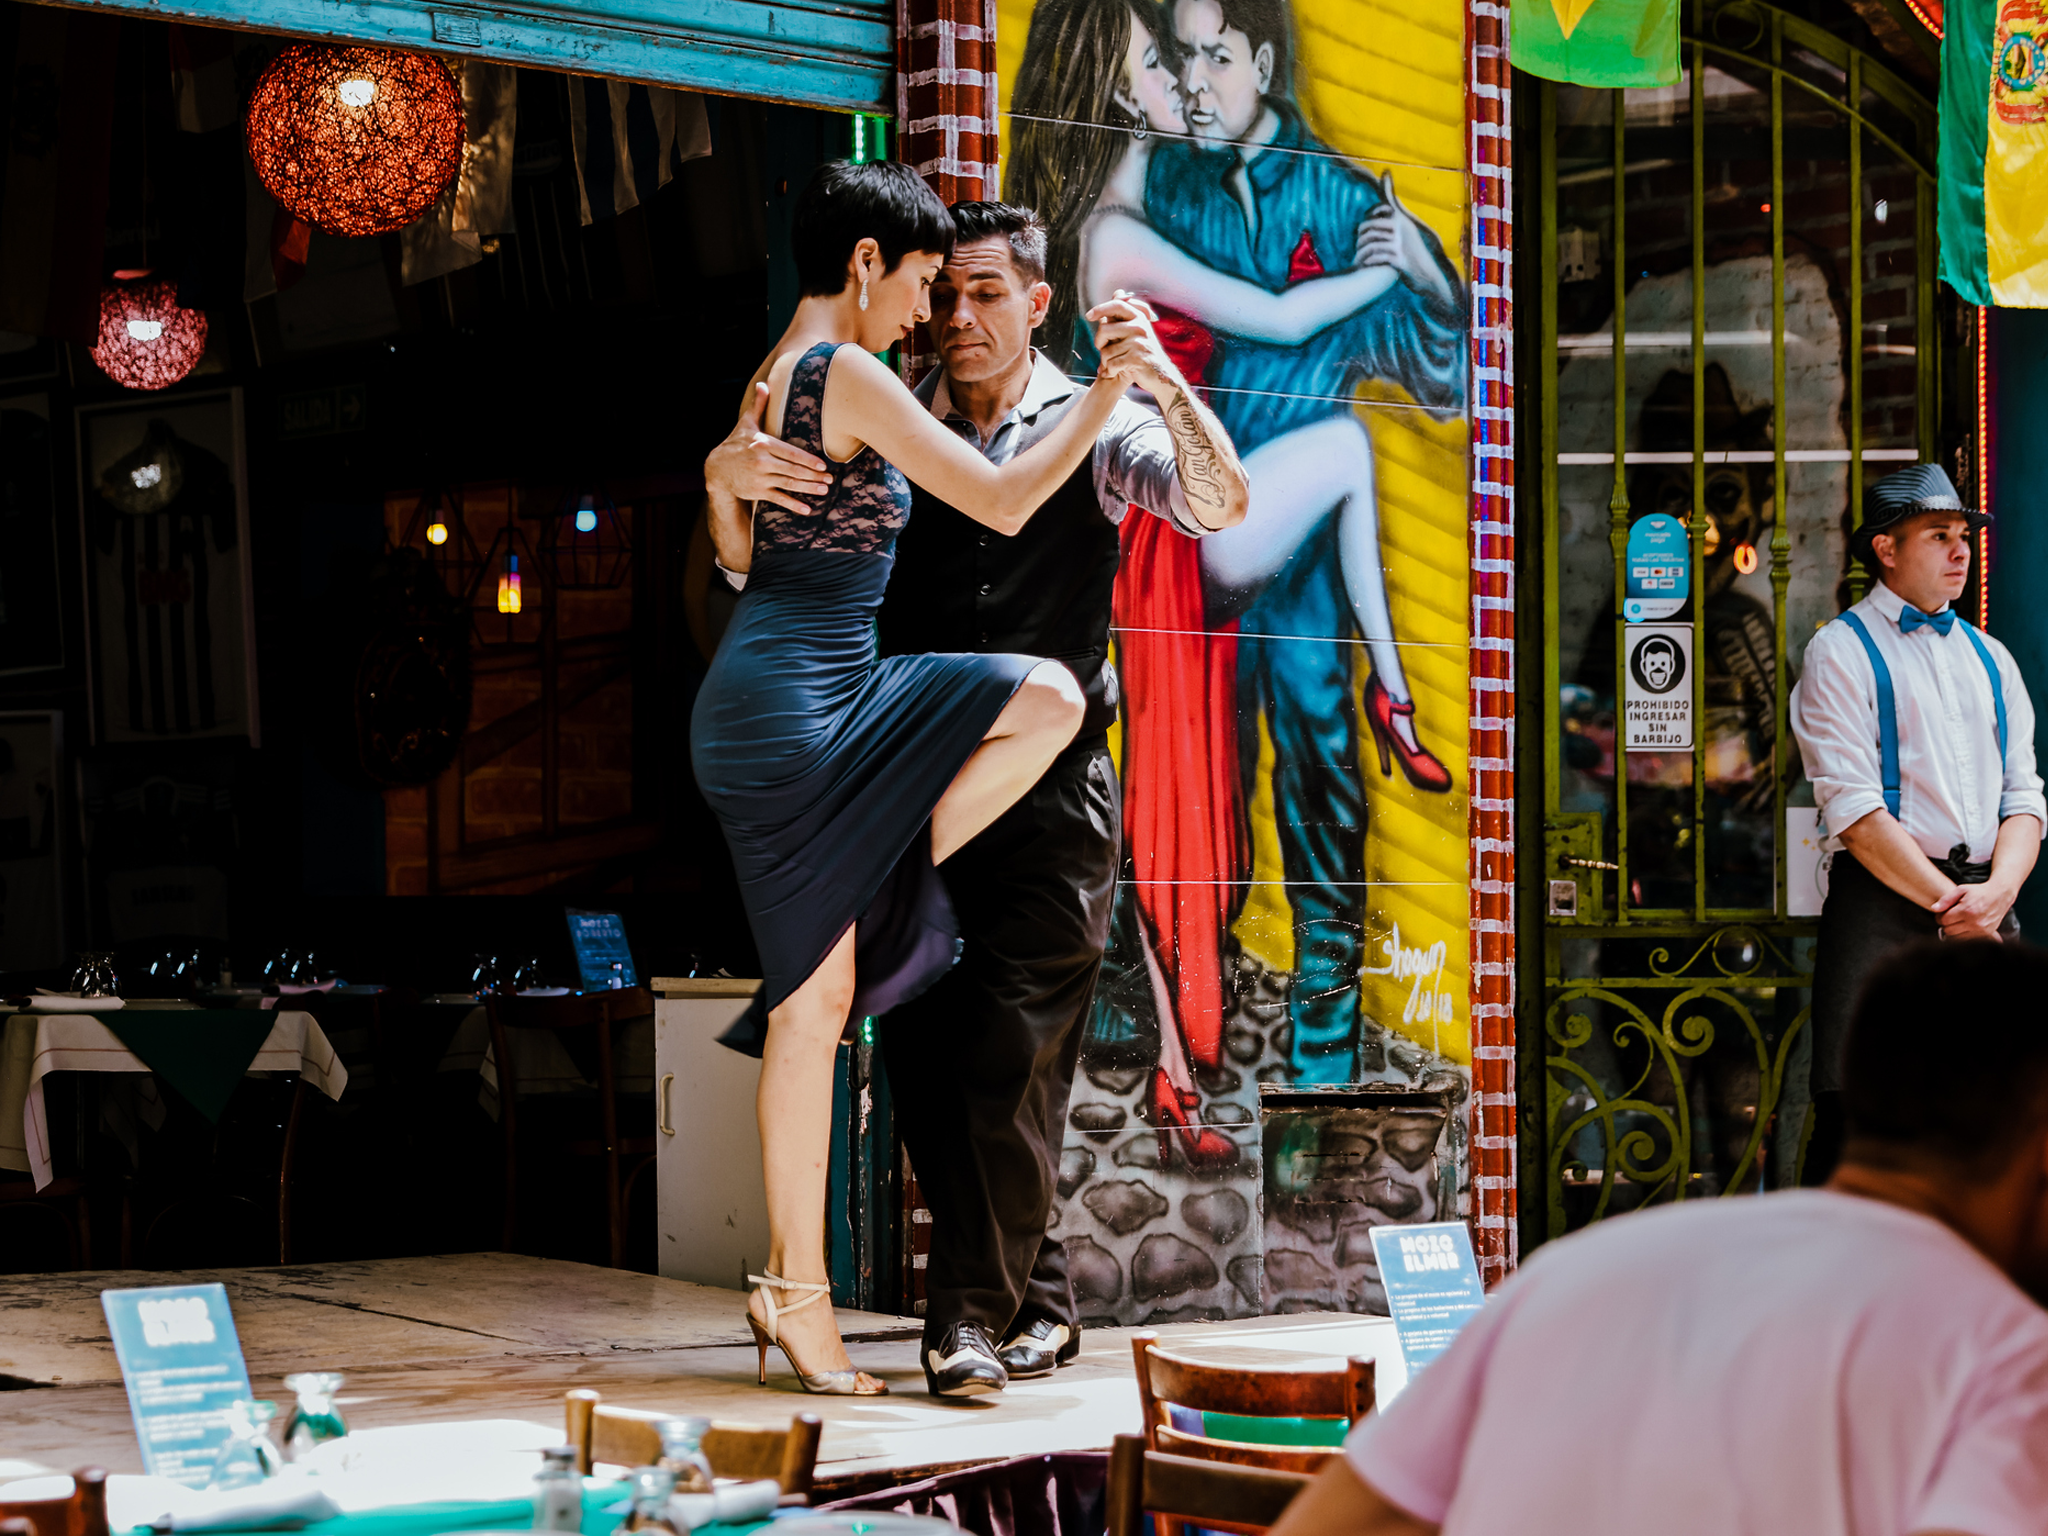 Buenos Aires has places aplenty to both watch and learn the tango